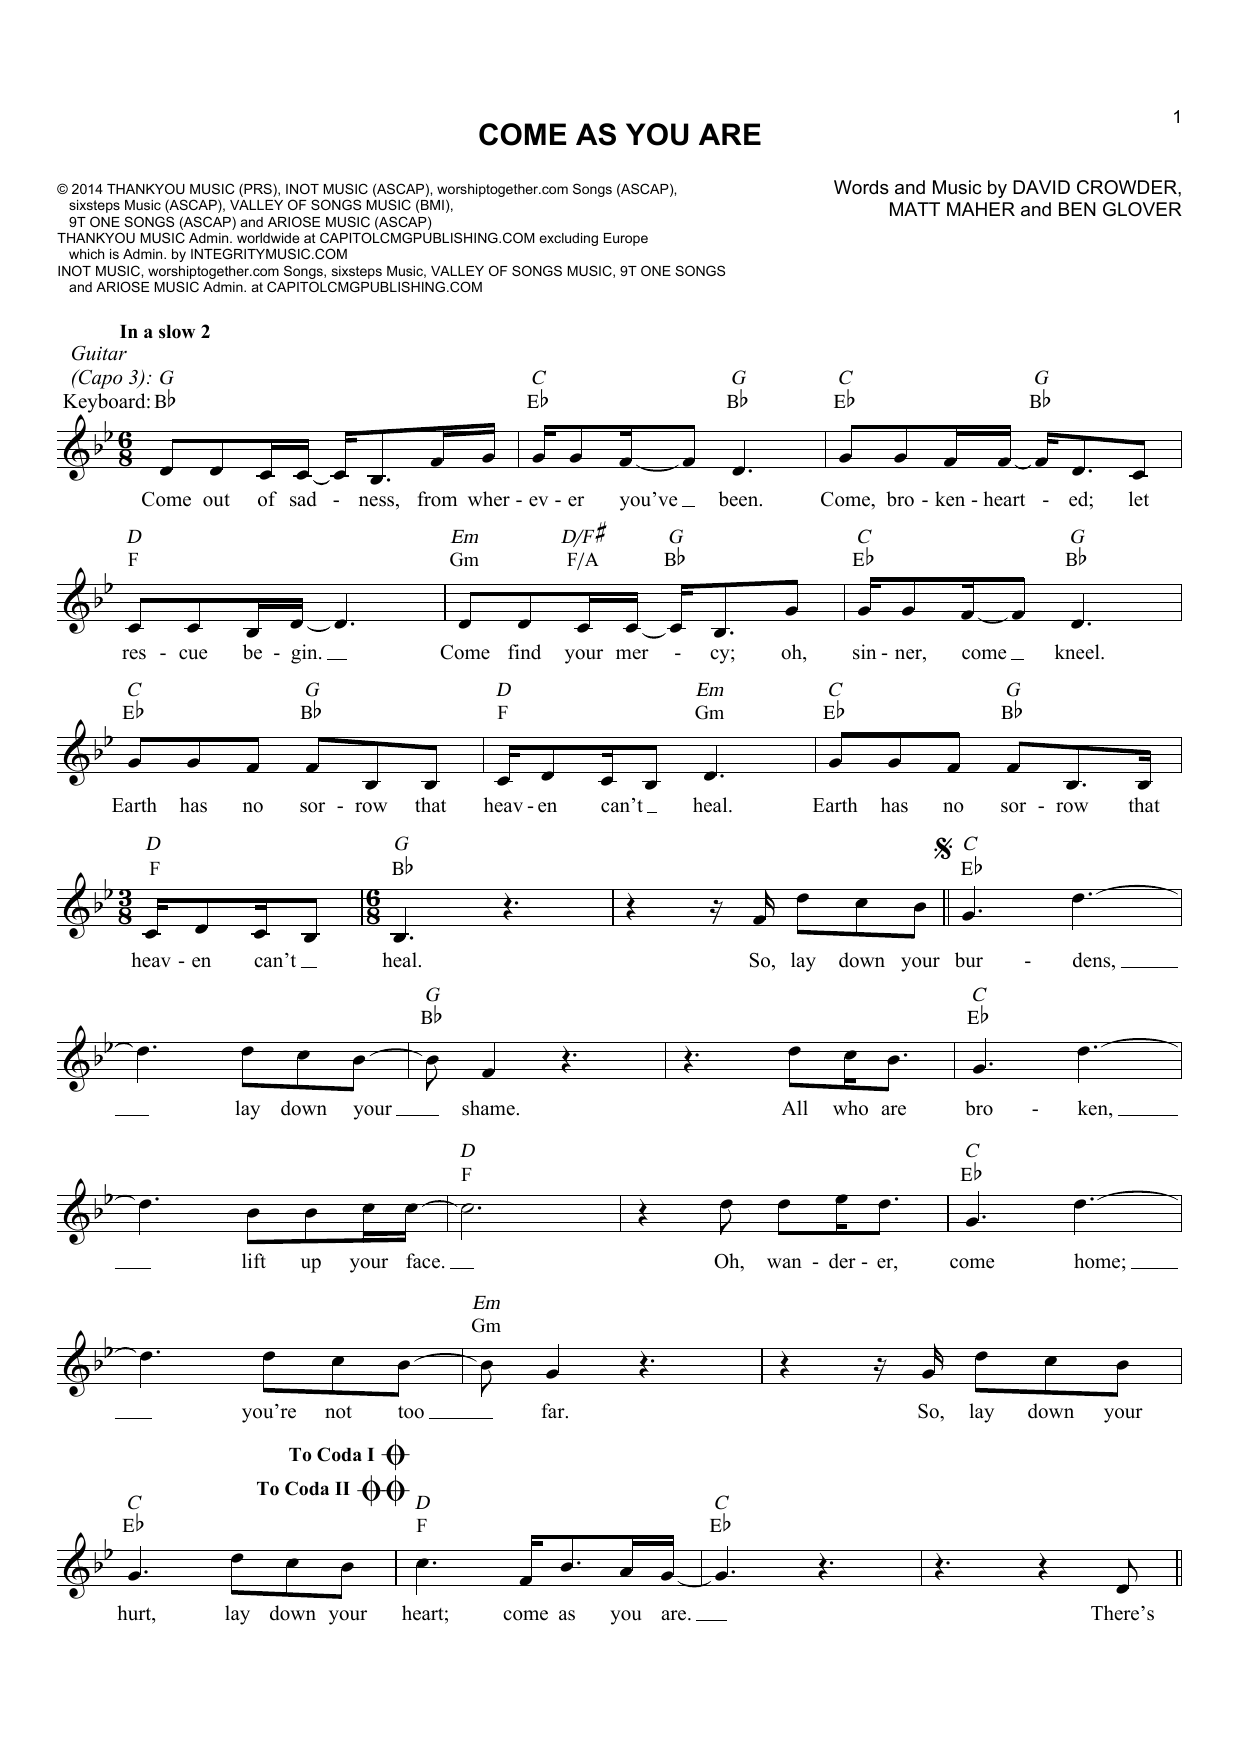 Download Crowder Come As You Are Sheet Music